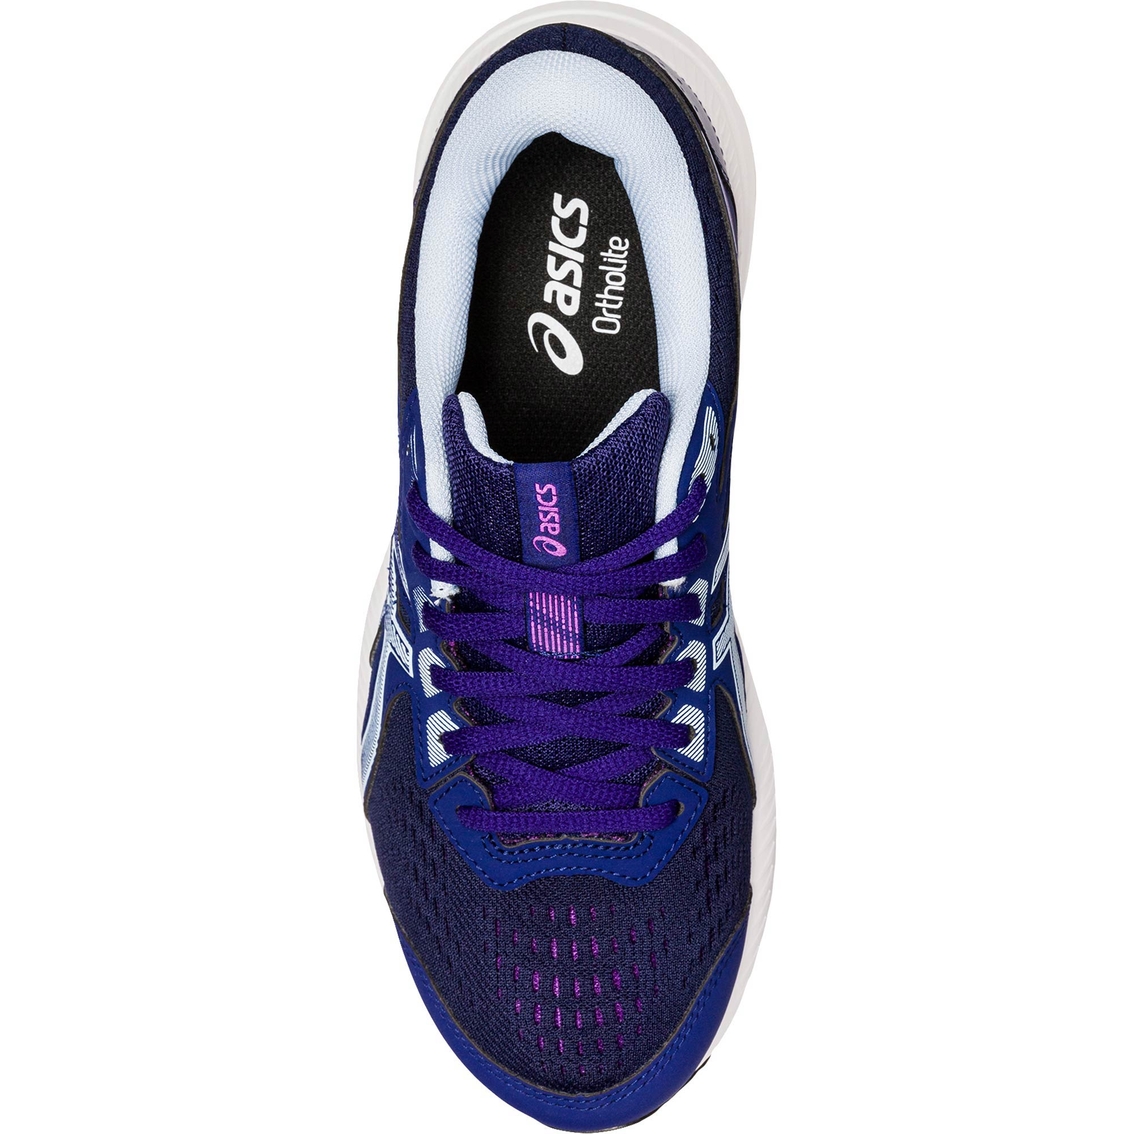 ASICS Women's GEL Contend 8 Running Shoes - Image 6 of 7